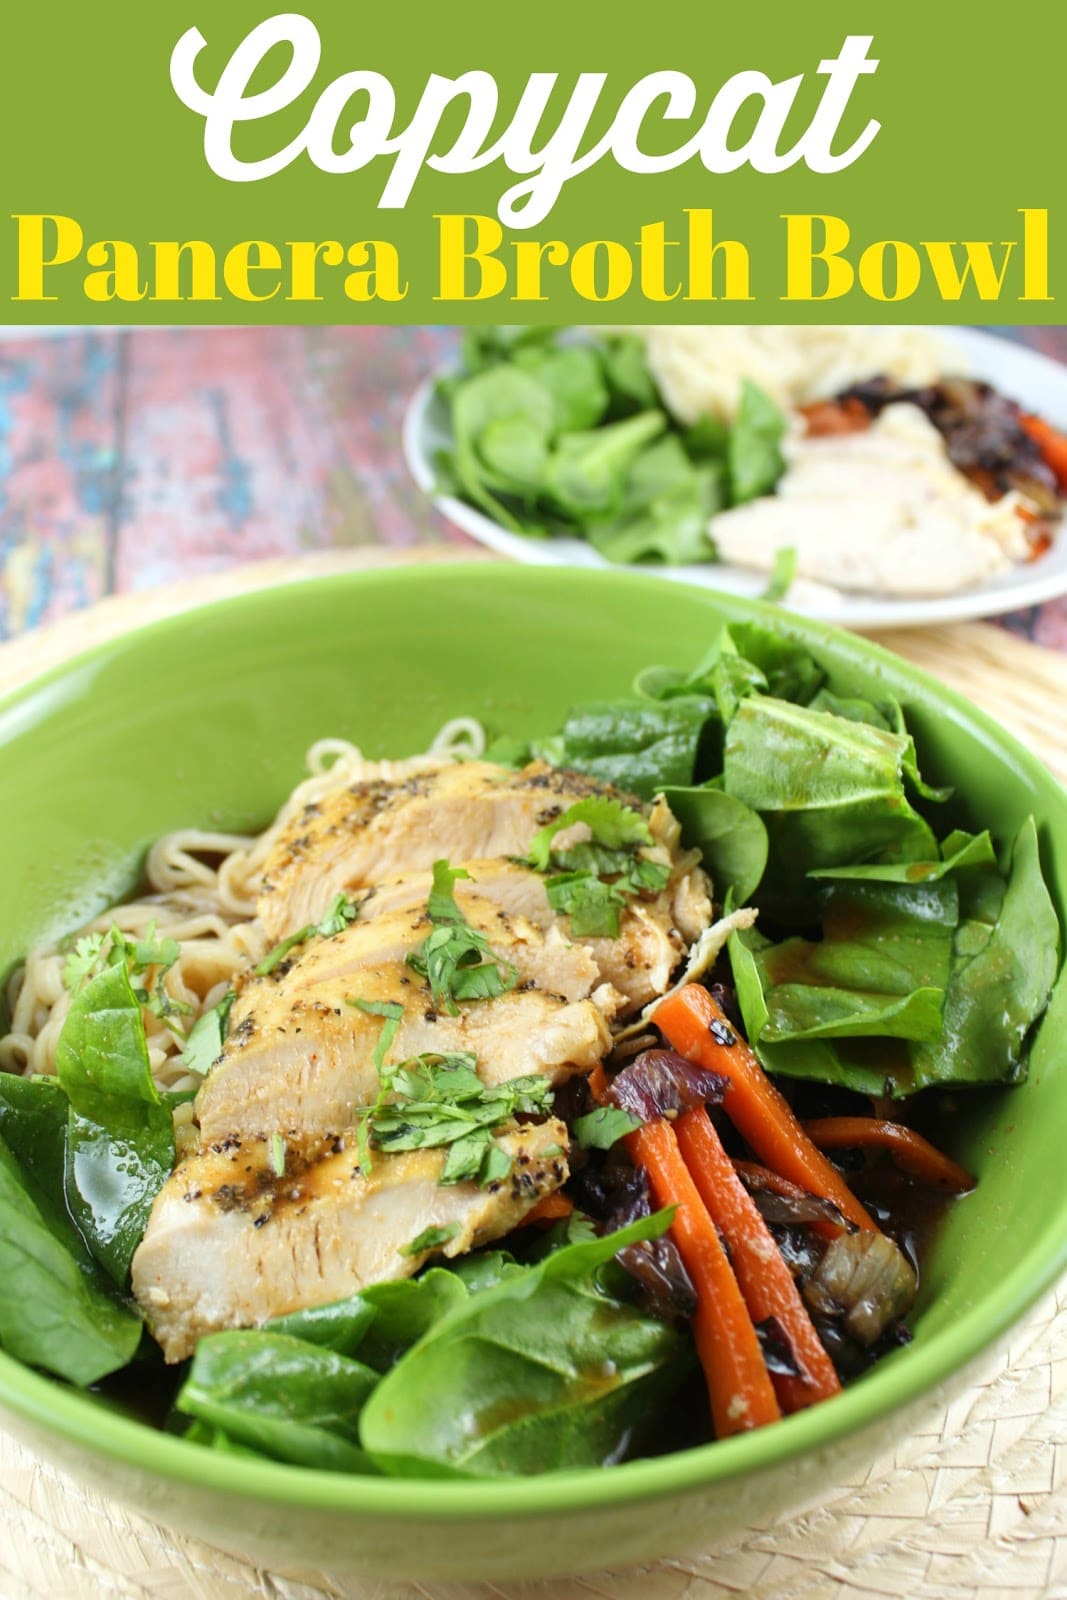 This Panera Broth Bowl recipe is perfection and spot on! These have disappeared from the Panera menu but they're still in our minds and now can be in our belly! I was one of the FIRST to try them and the blog post review went viral (revisit the initial review here). via @foodhussy